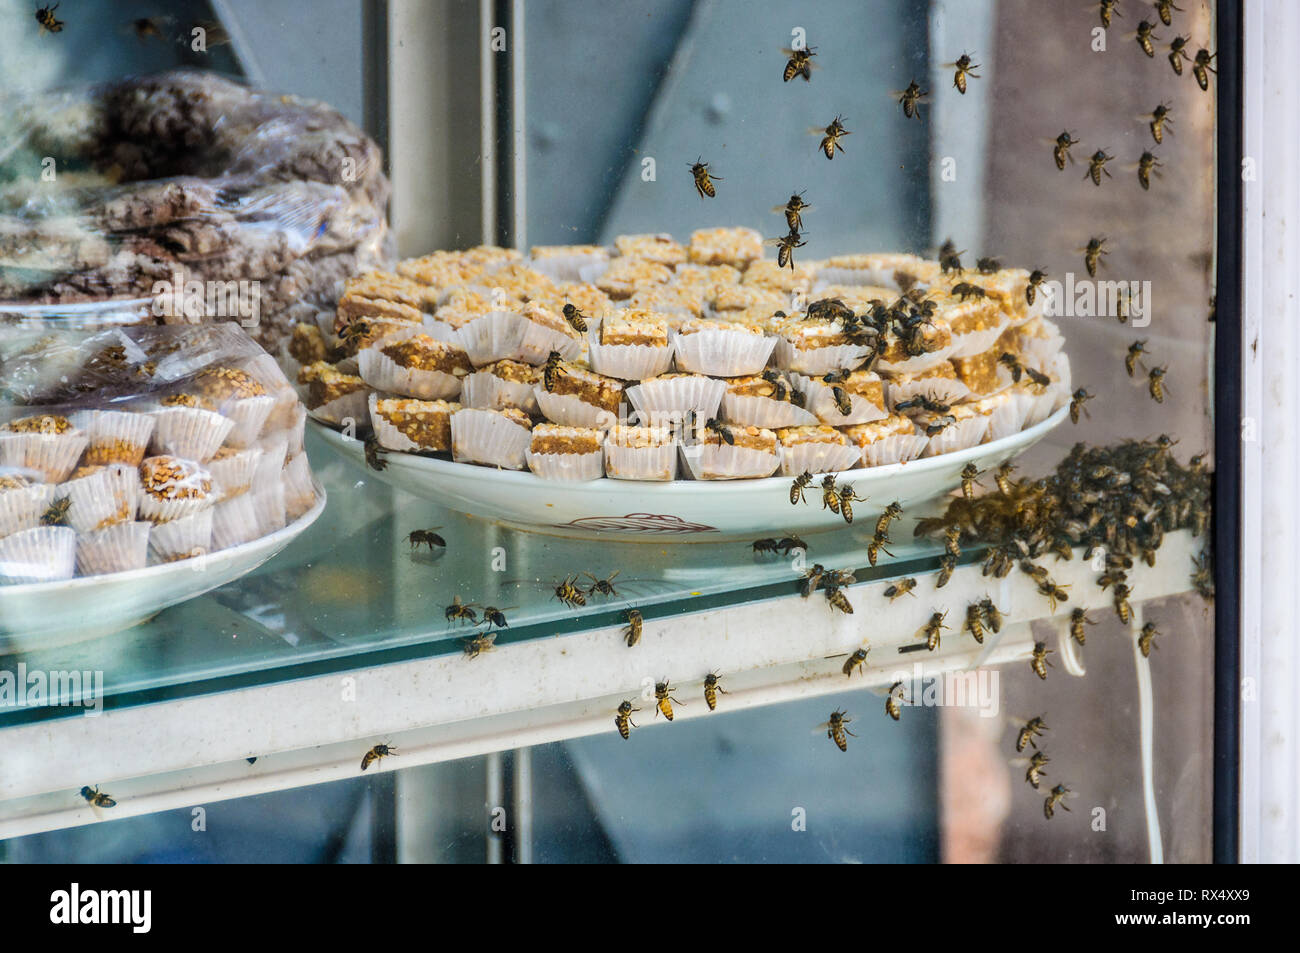 Bees in local sweet in the Medina of Marrakech, Morocco Stock Photo